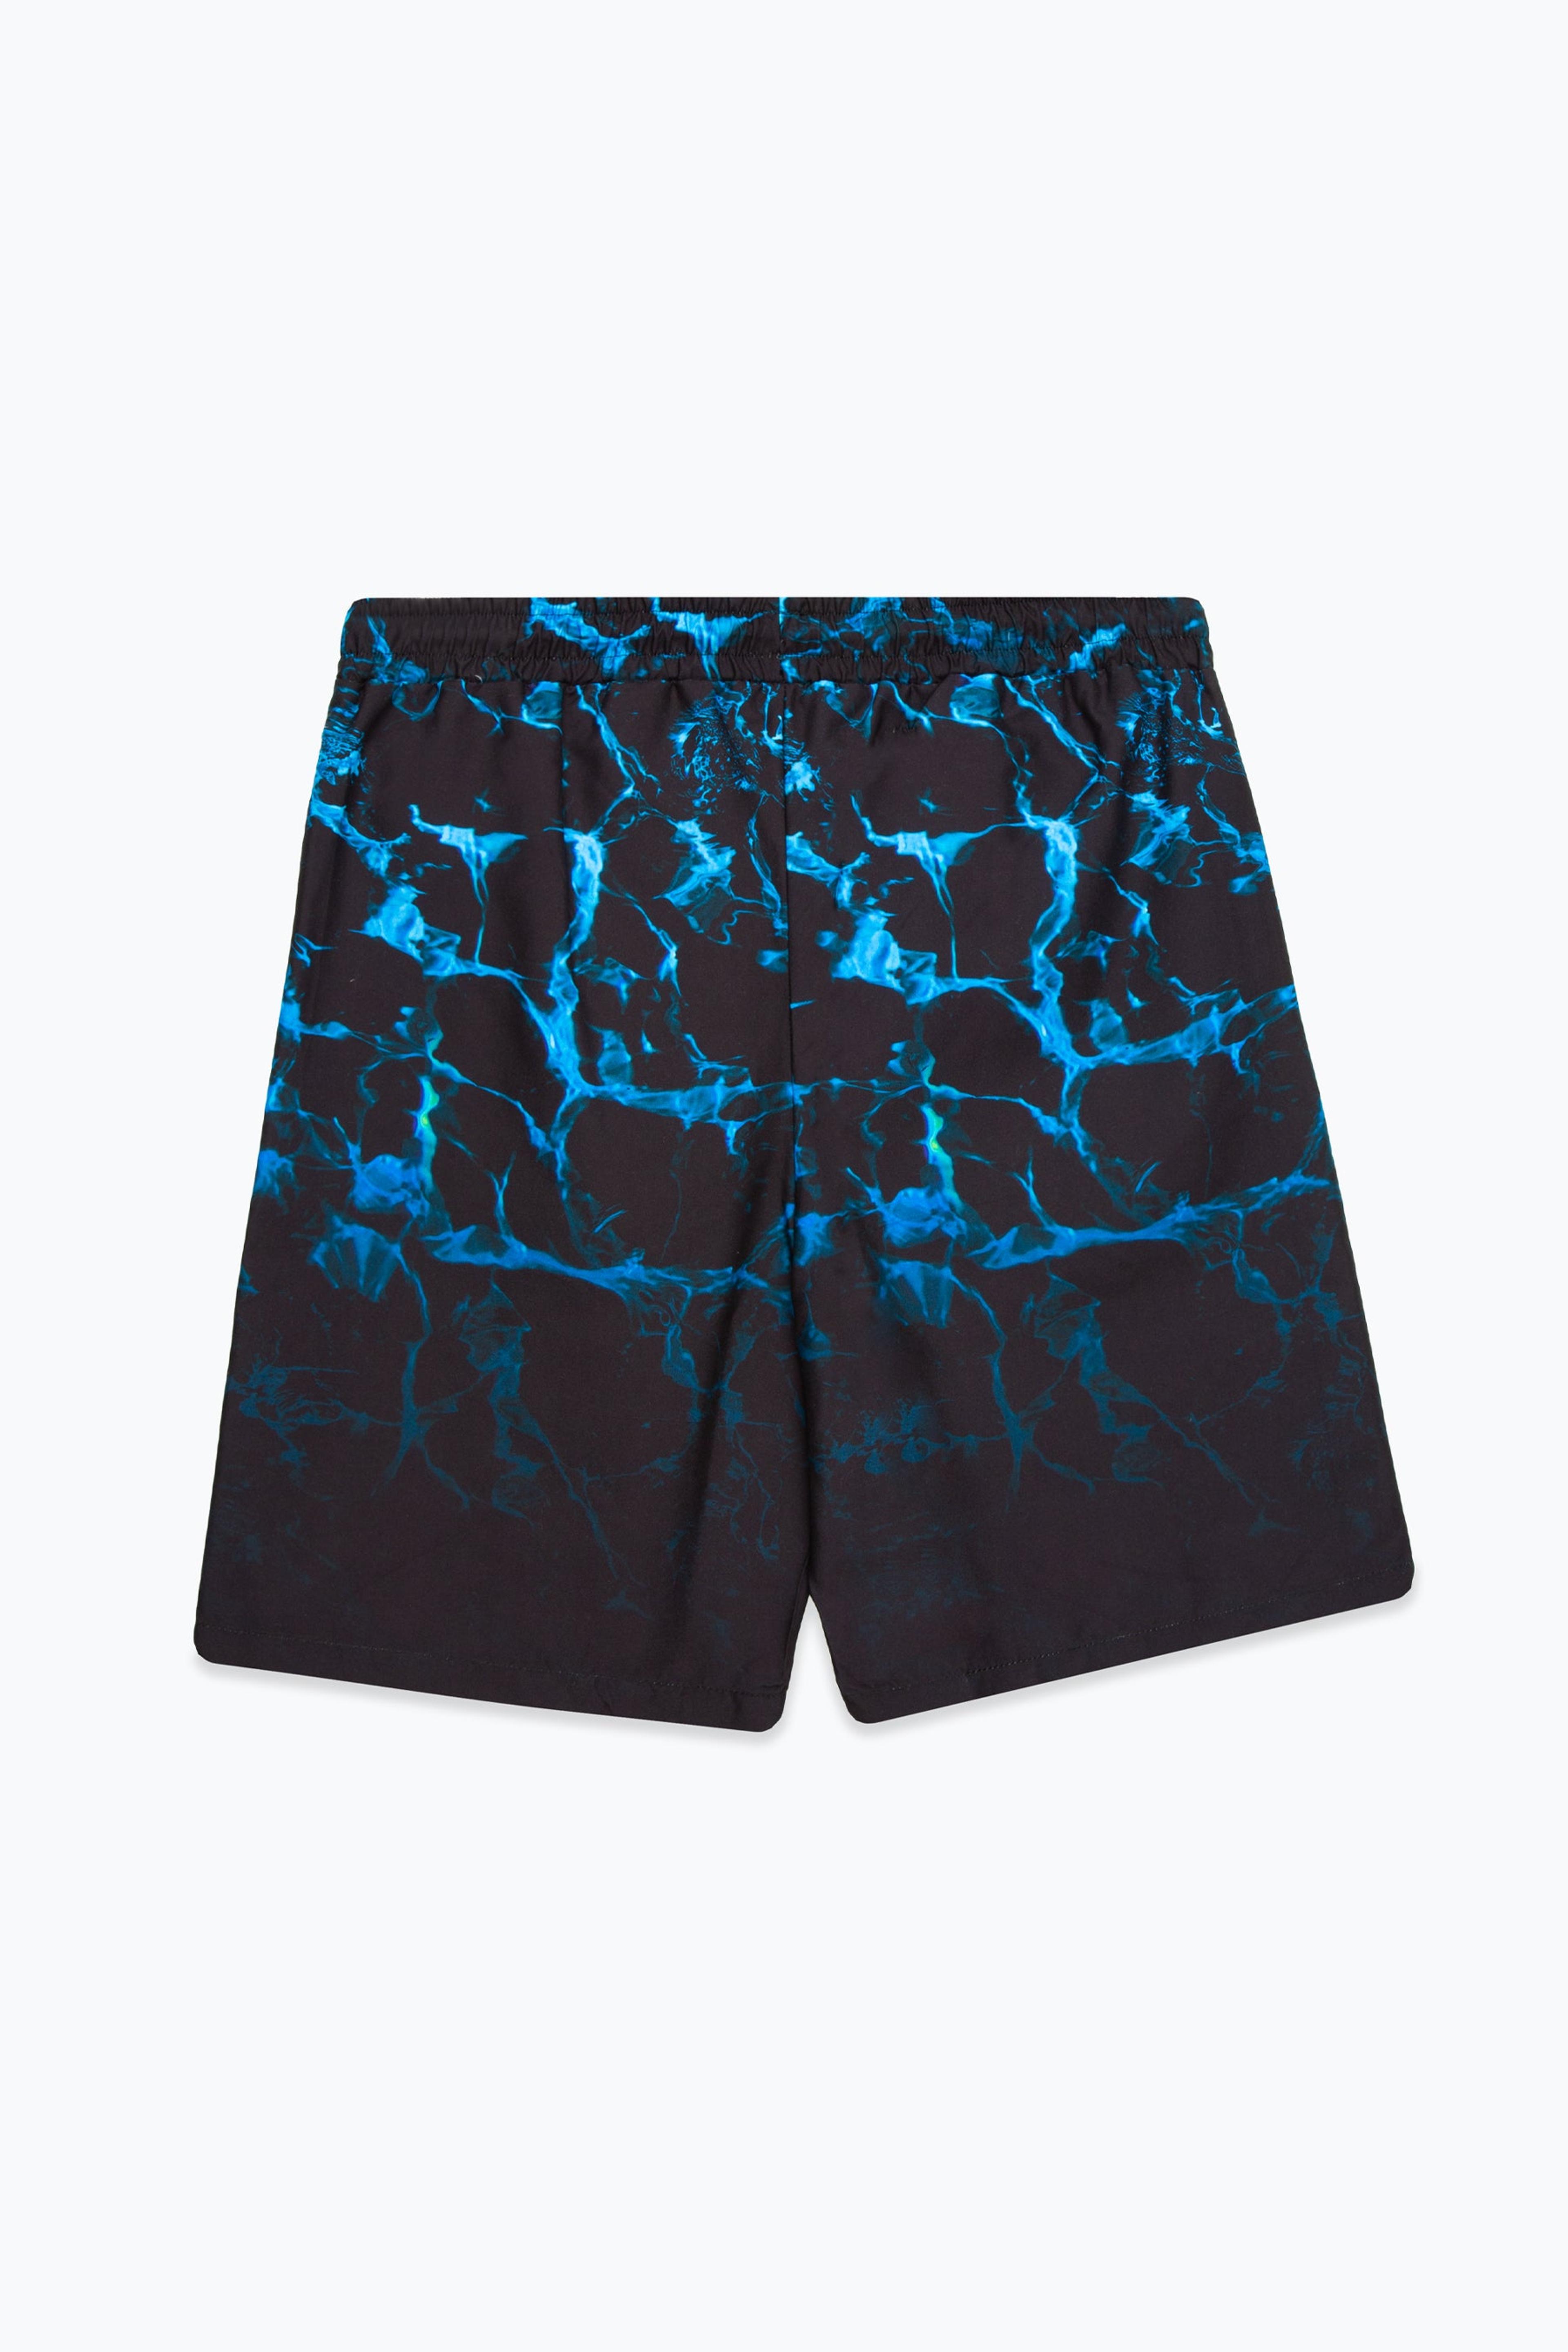 Alternate View 4 of HYPE BOYS MARBLE LUXE BOARD SHORTS